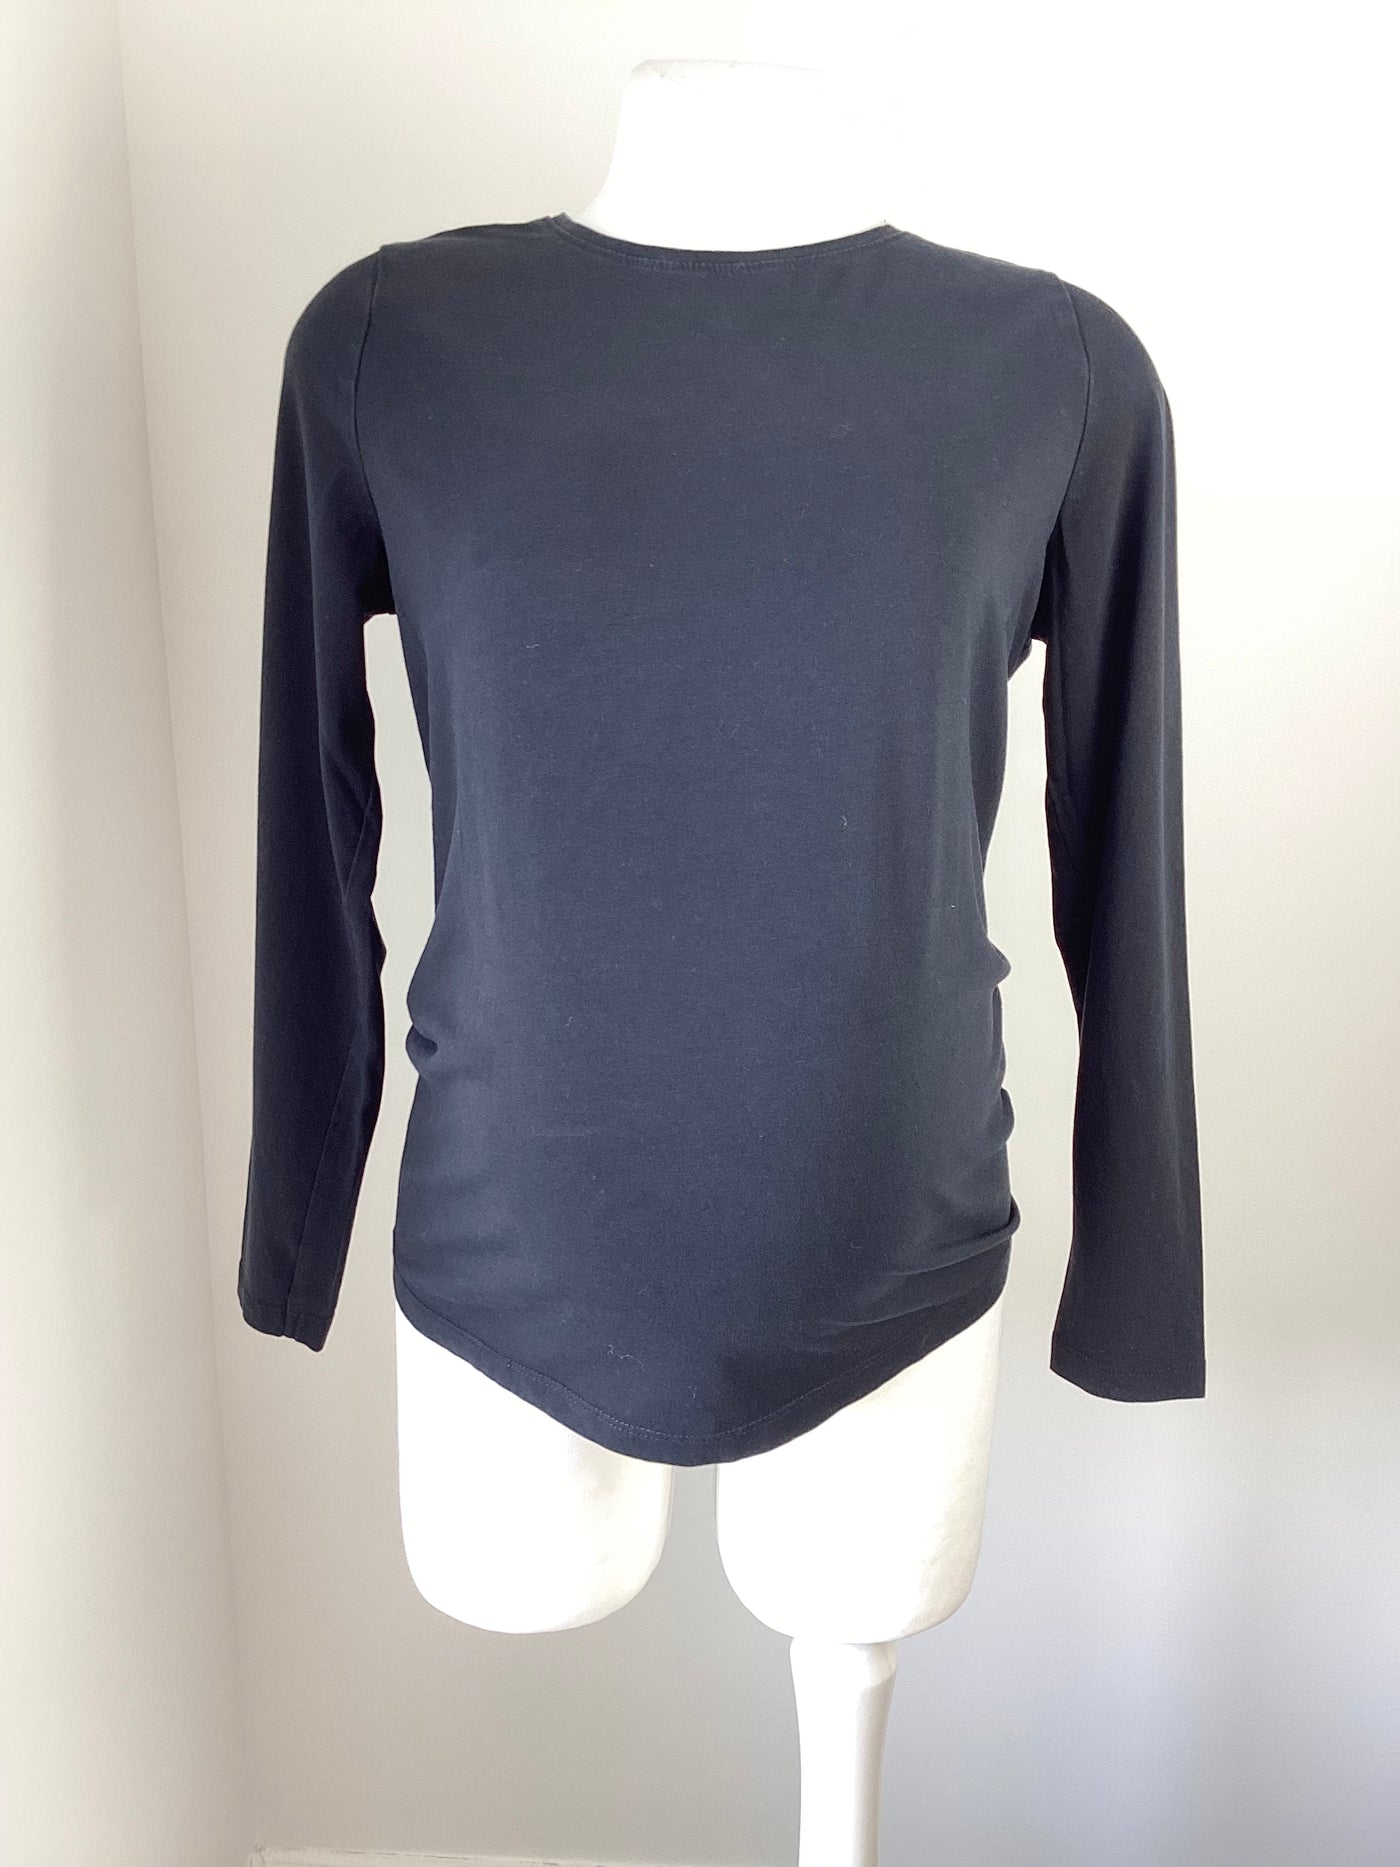 New Look Maternity black long sleeved top - Size 12